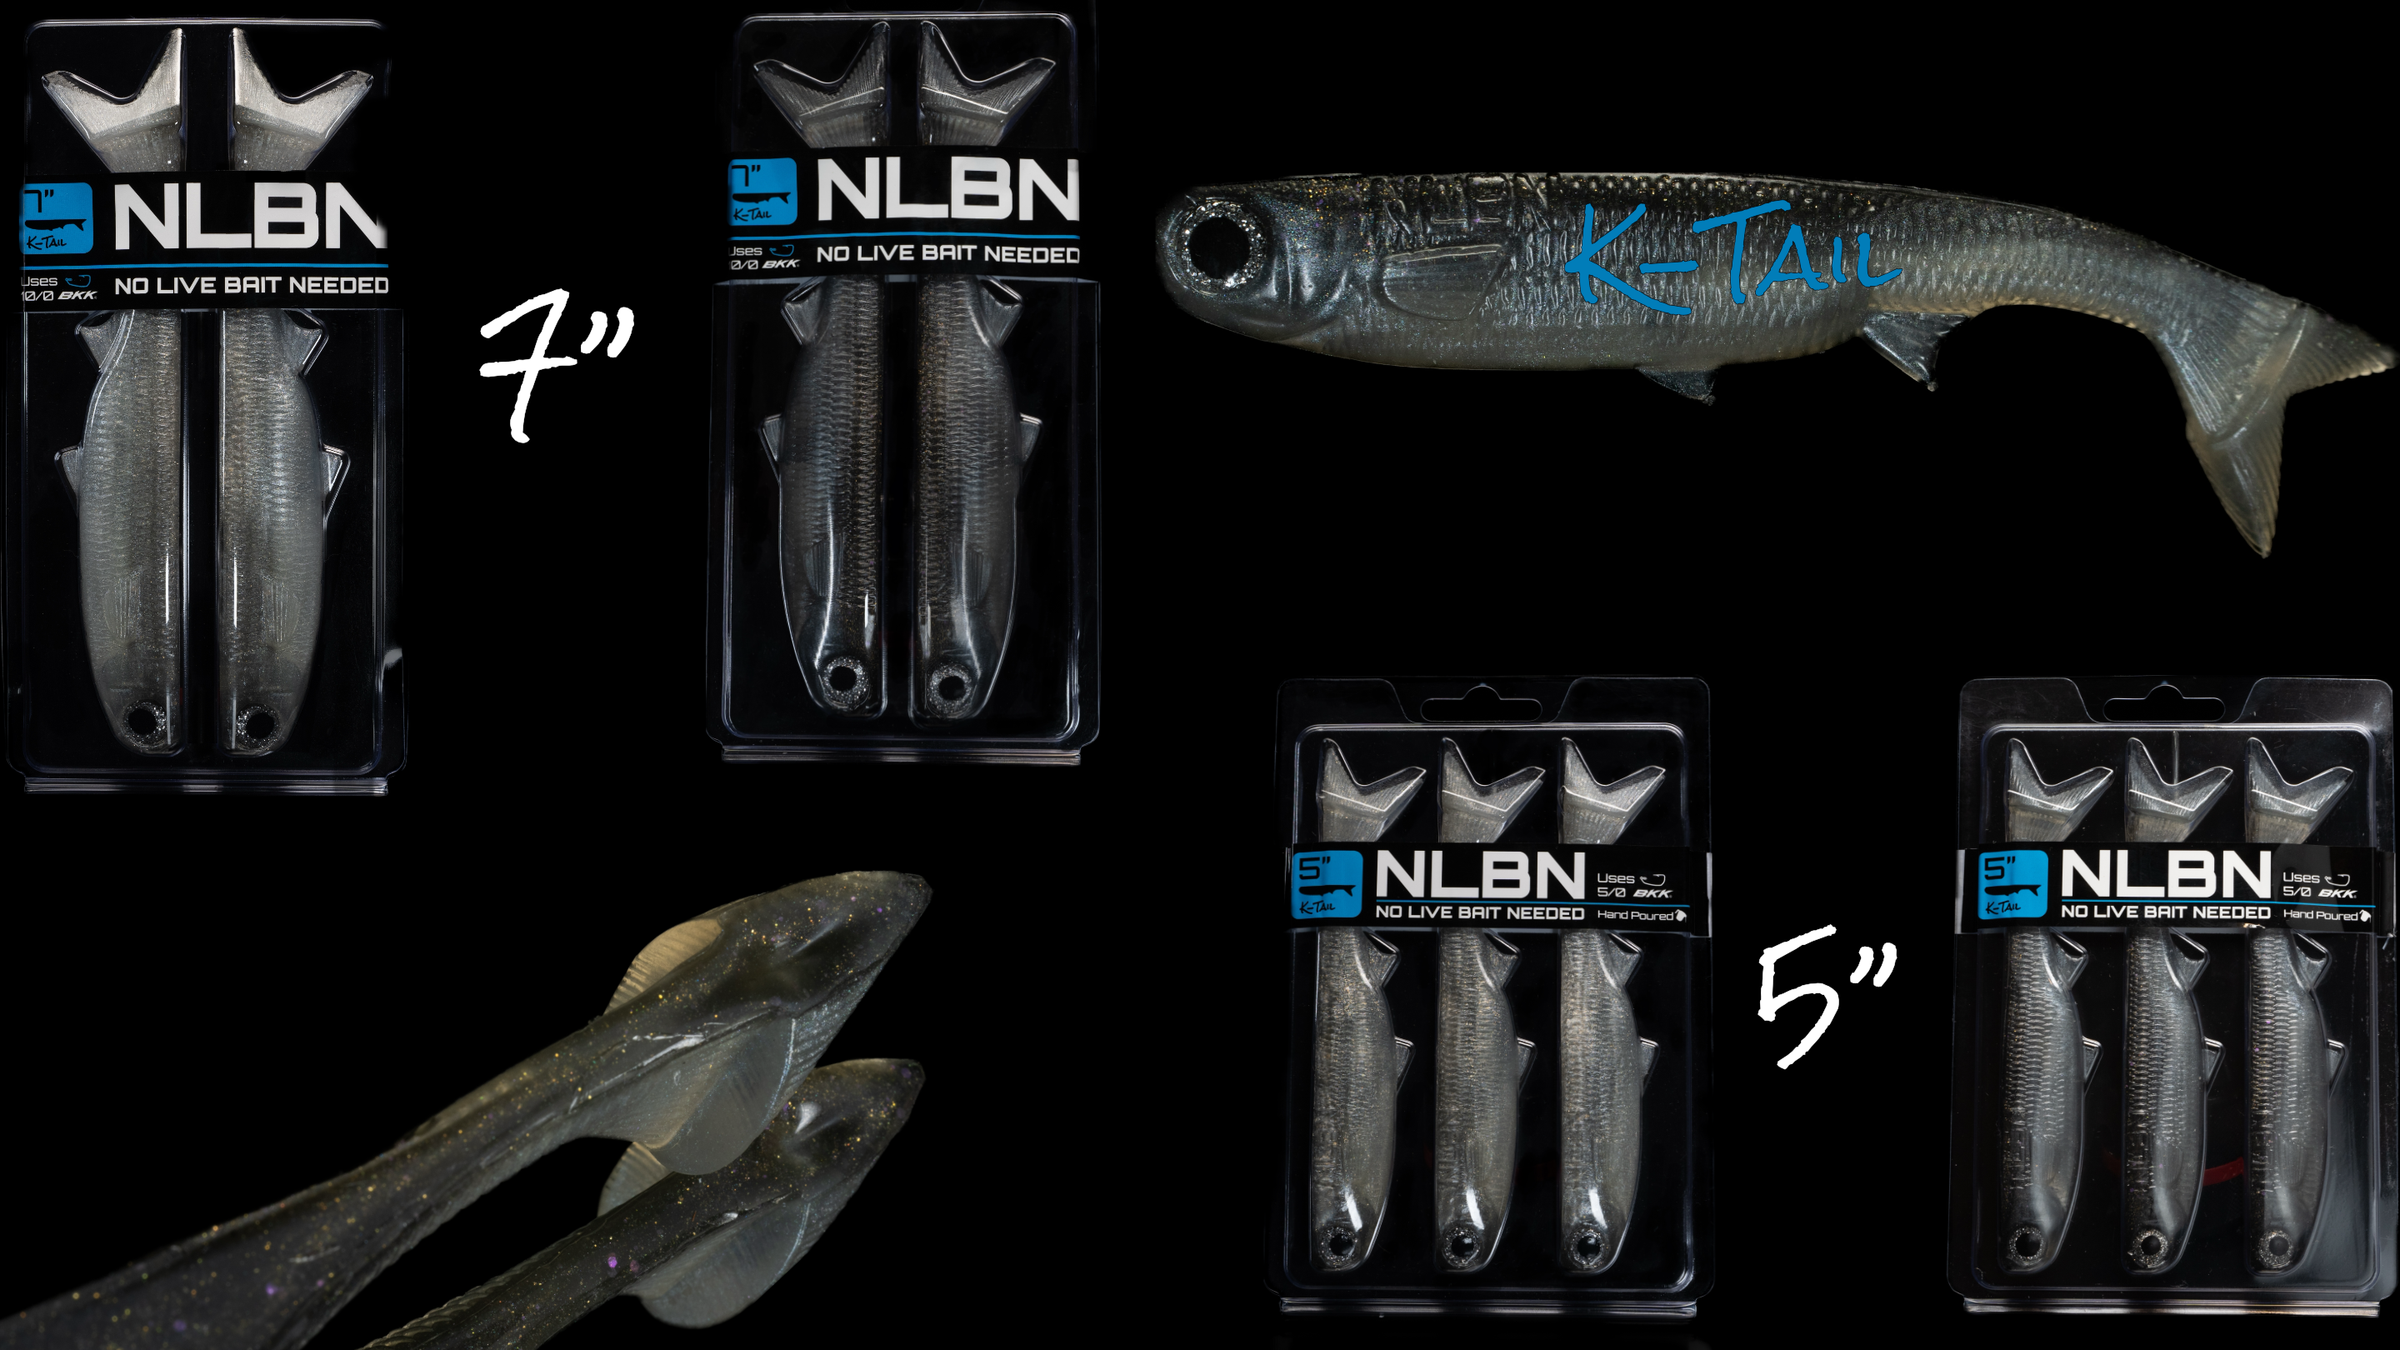 No Live Bait Needed - NLBN $200 Shopping Spree Giveaway